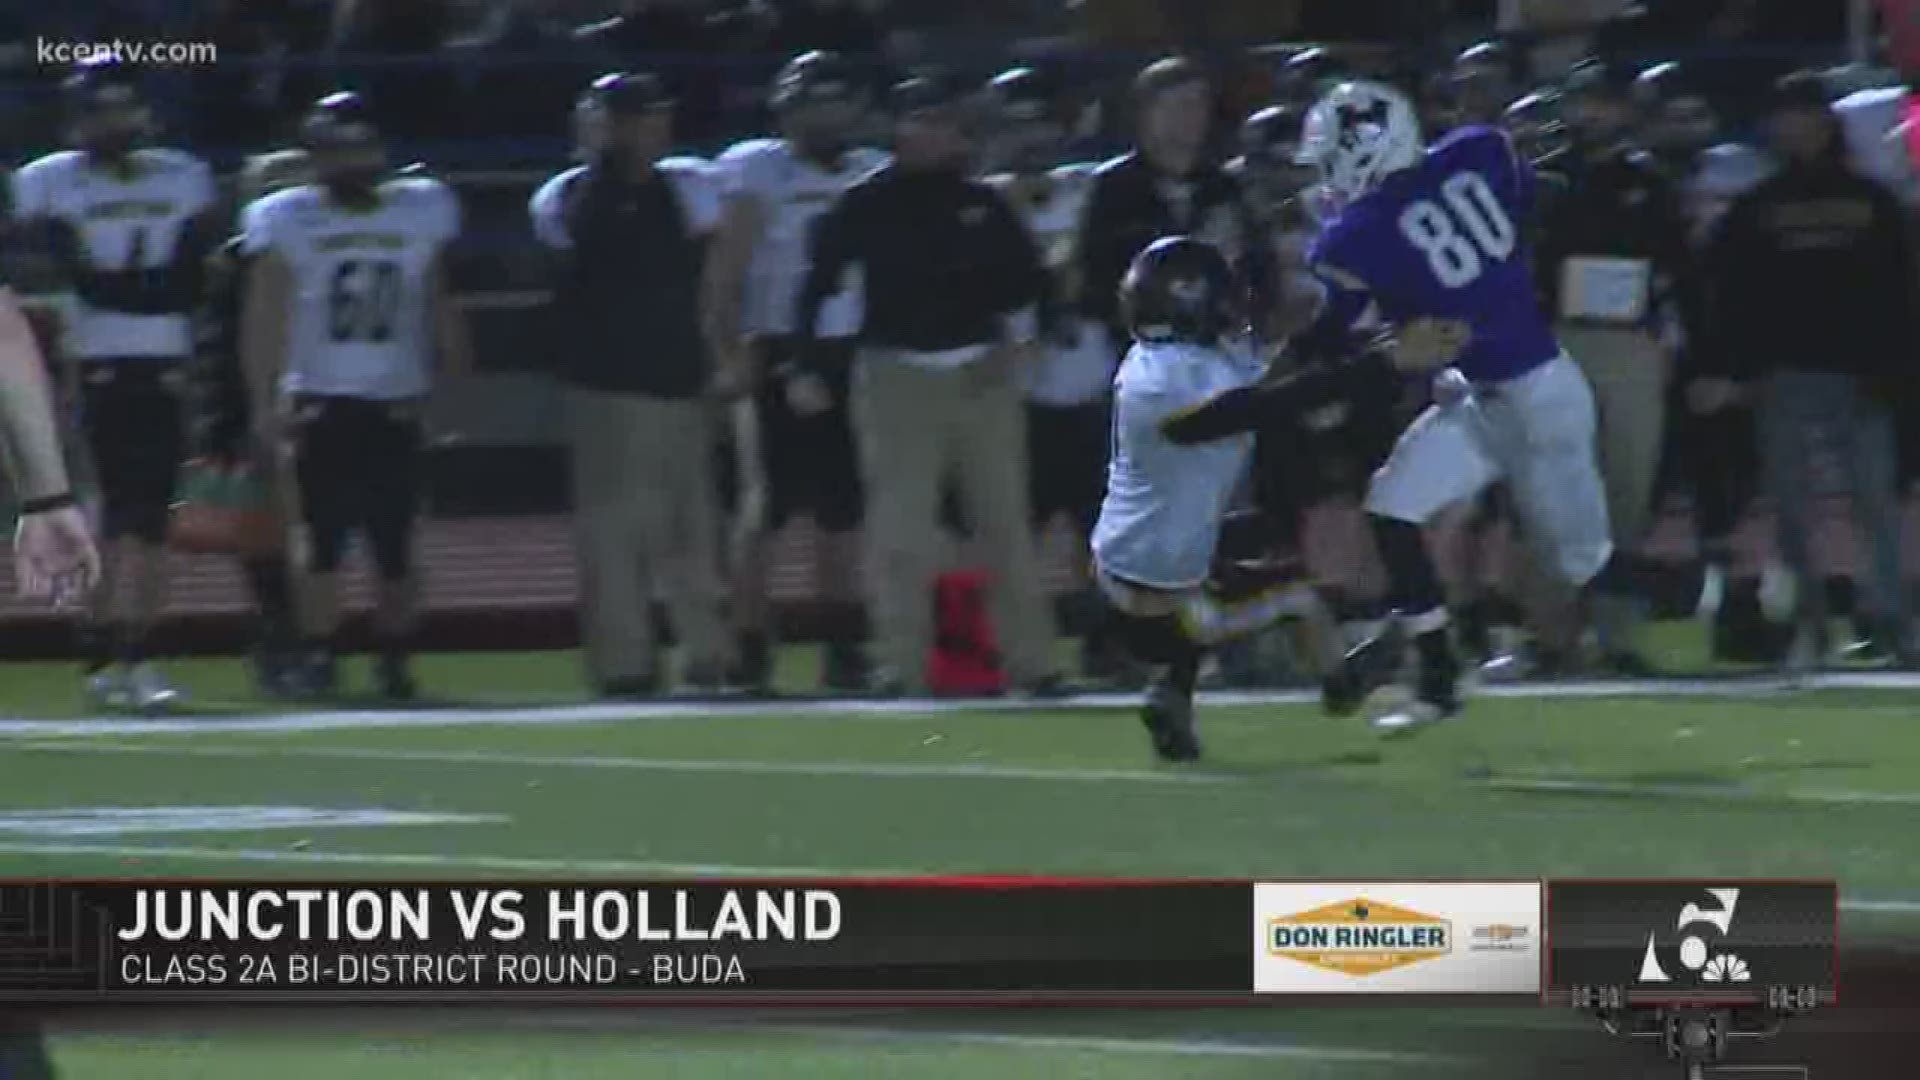 Holland ends Junction's postseason hopes with a 63-12 victory.